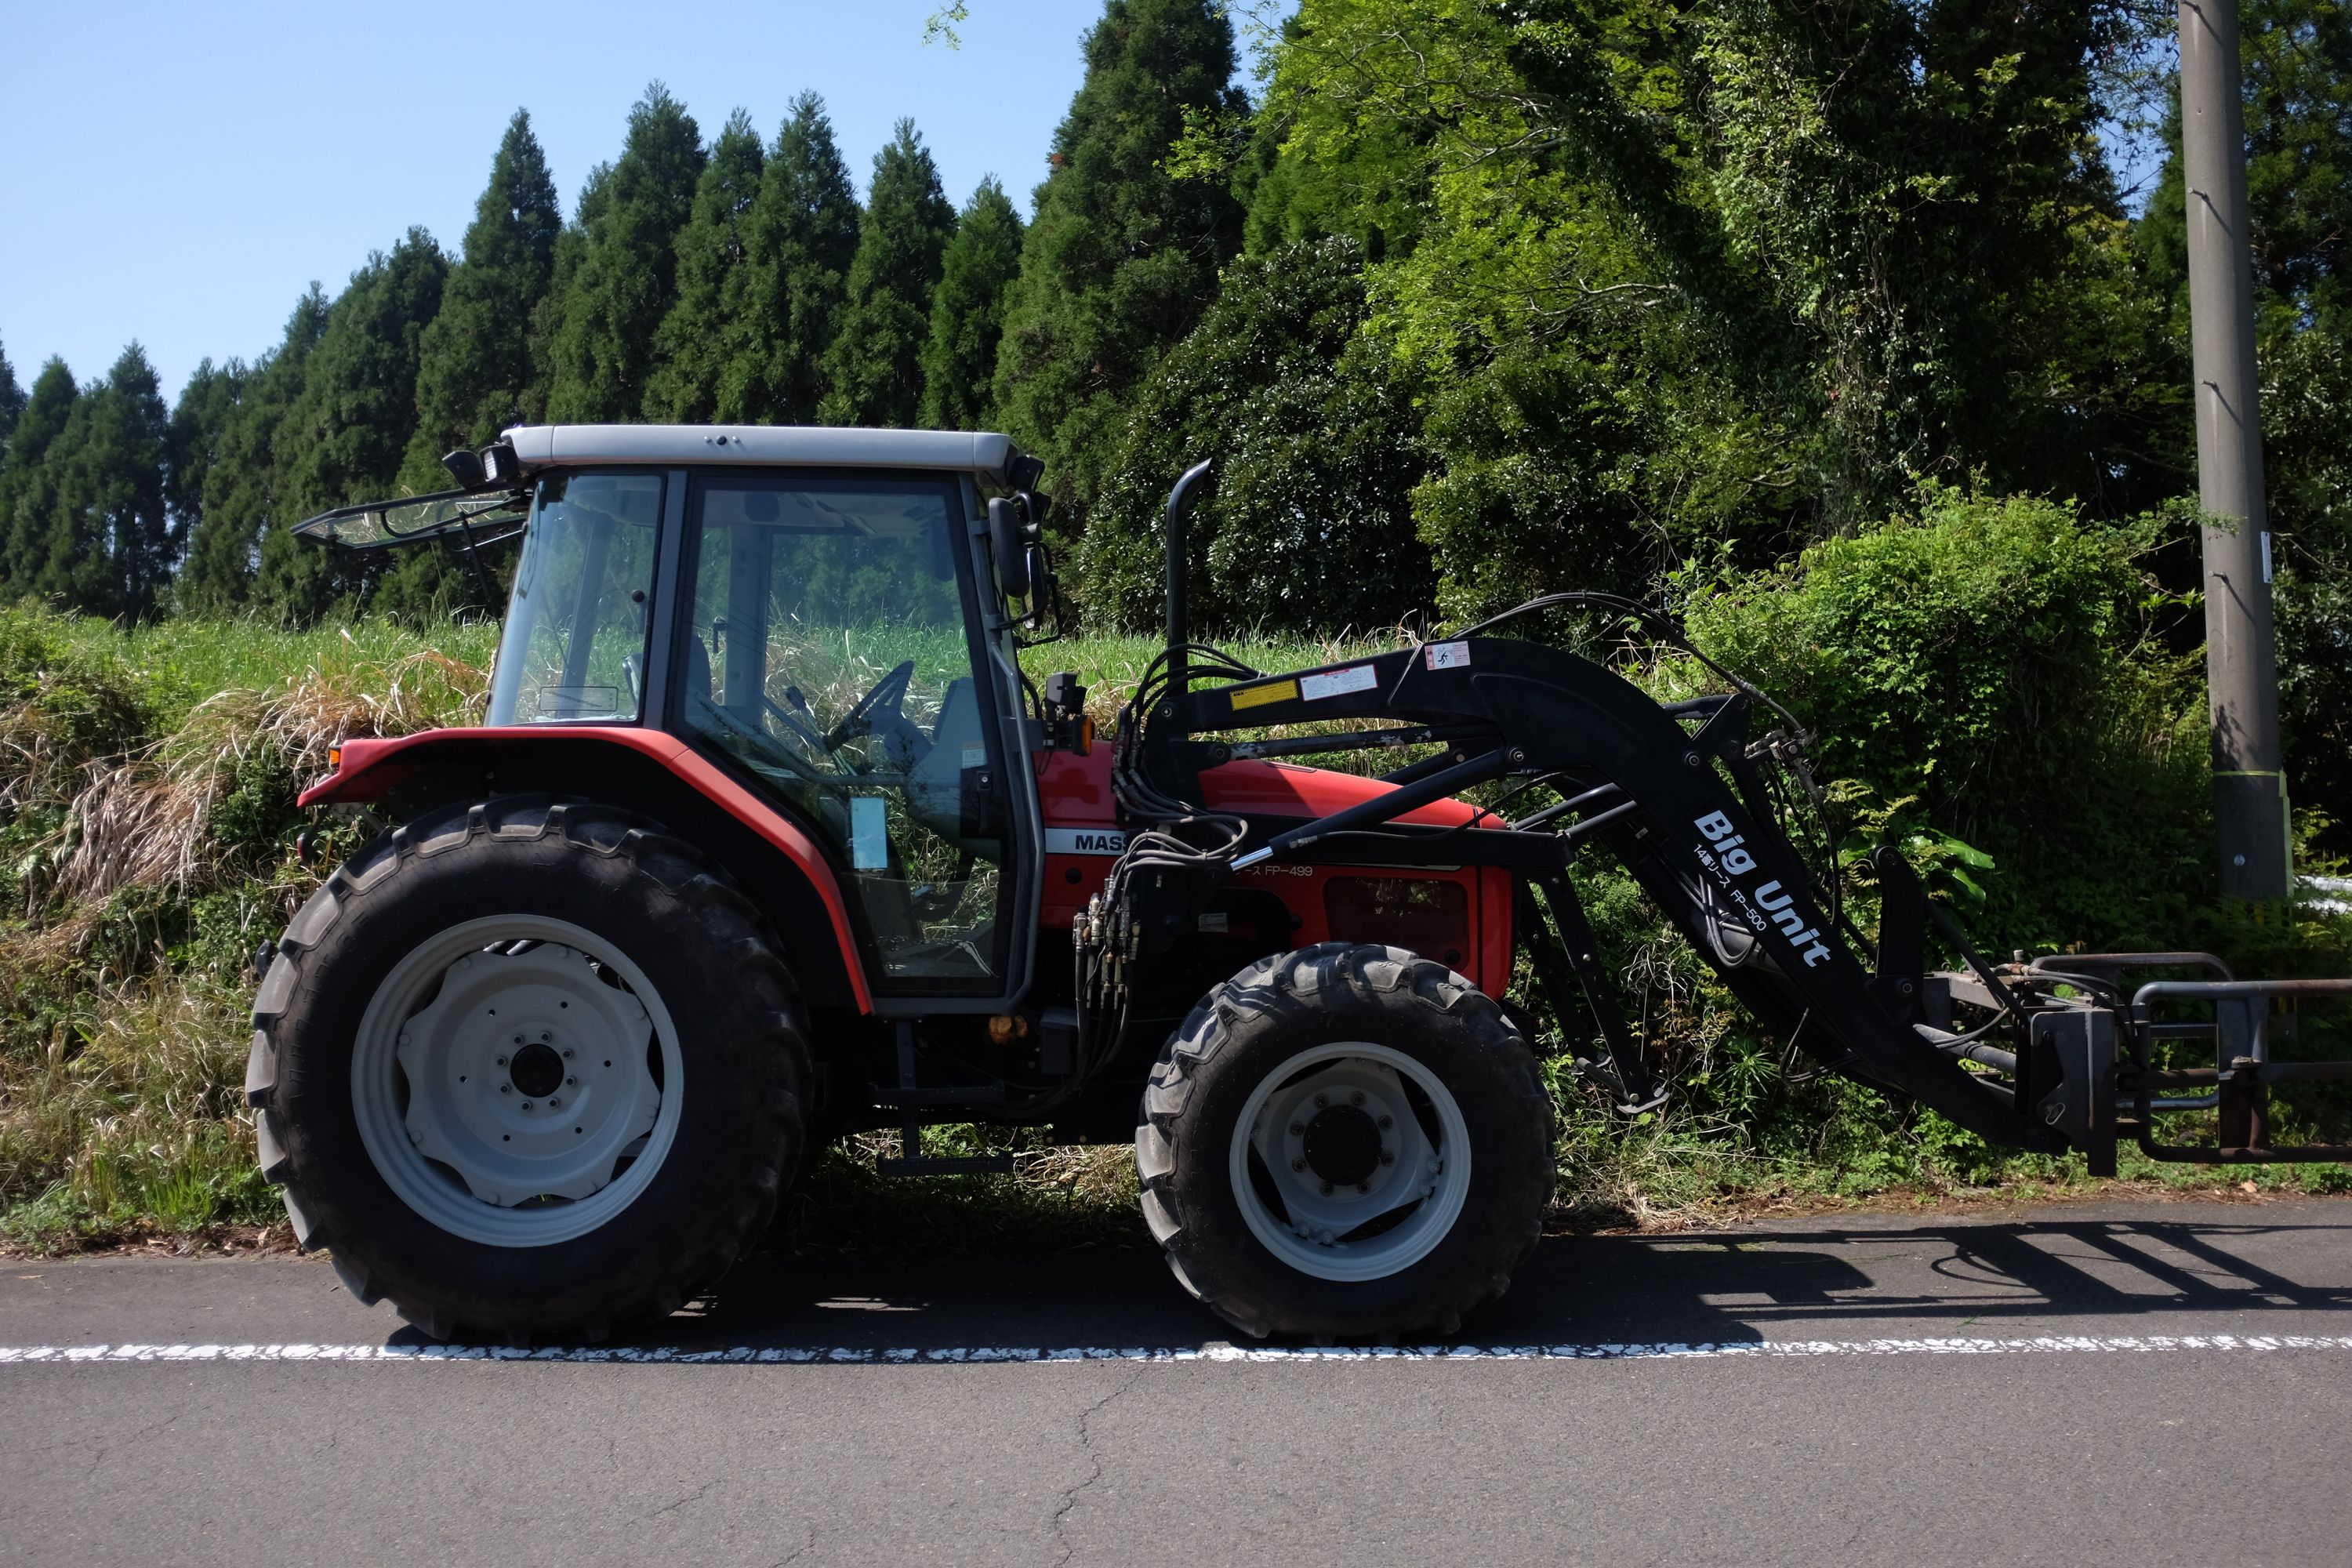 A tractor with a forklift labelled Big Unit stands by the side of the road.